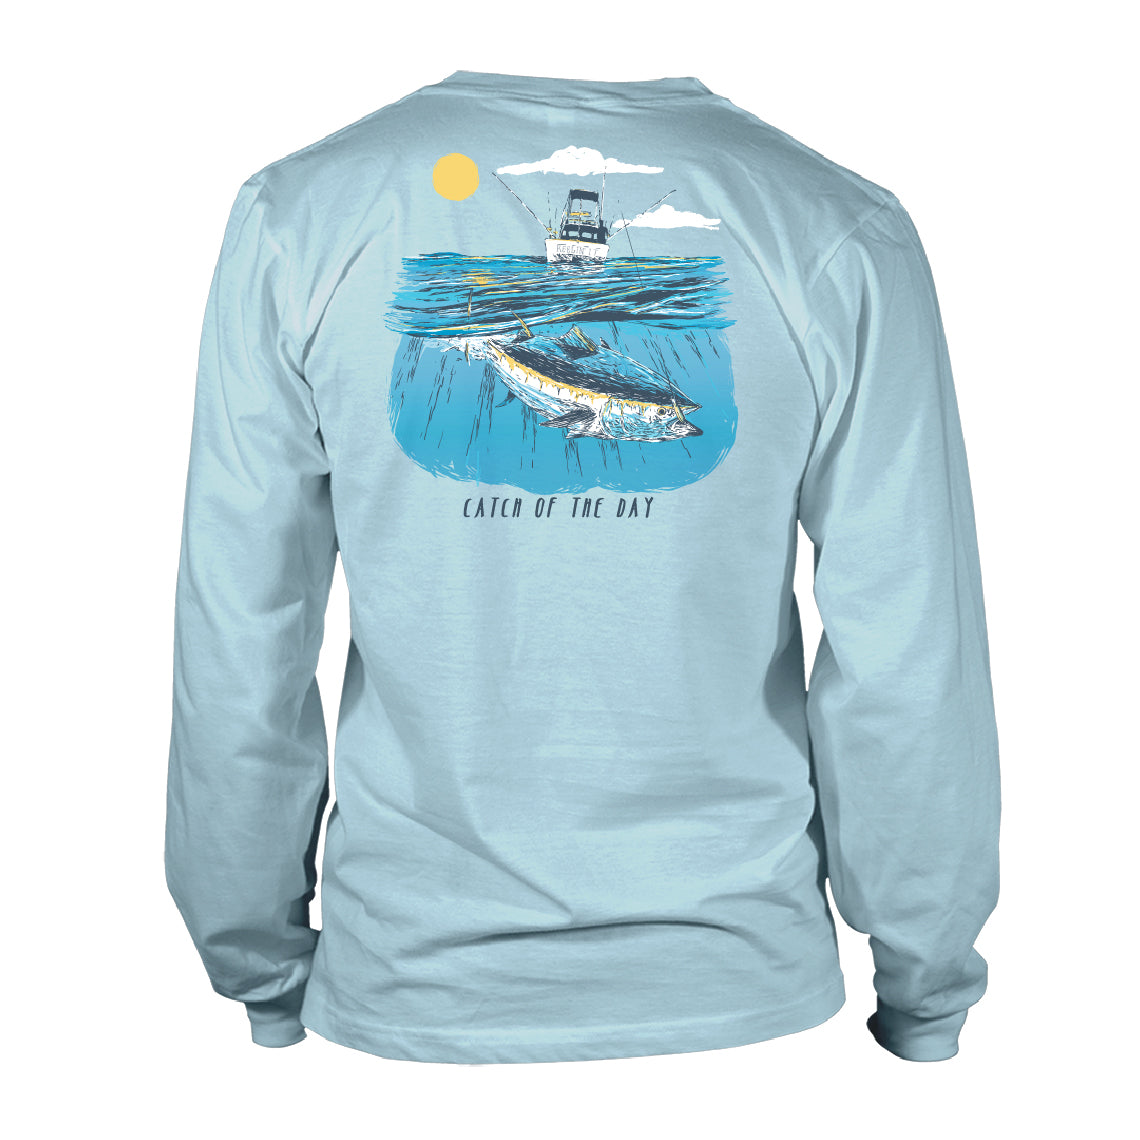 Youth & Toddler Long Sleeve Tee - Catch of the Day - Sky Blue